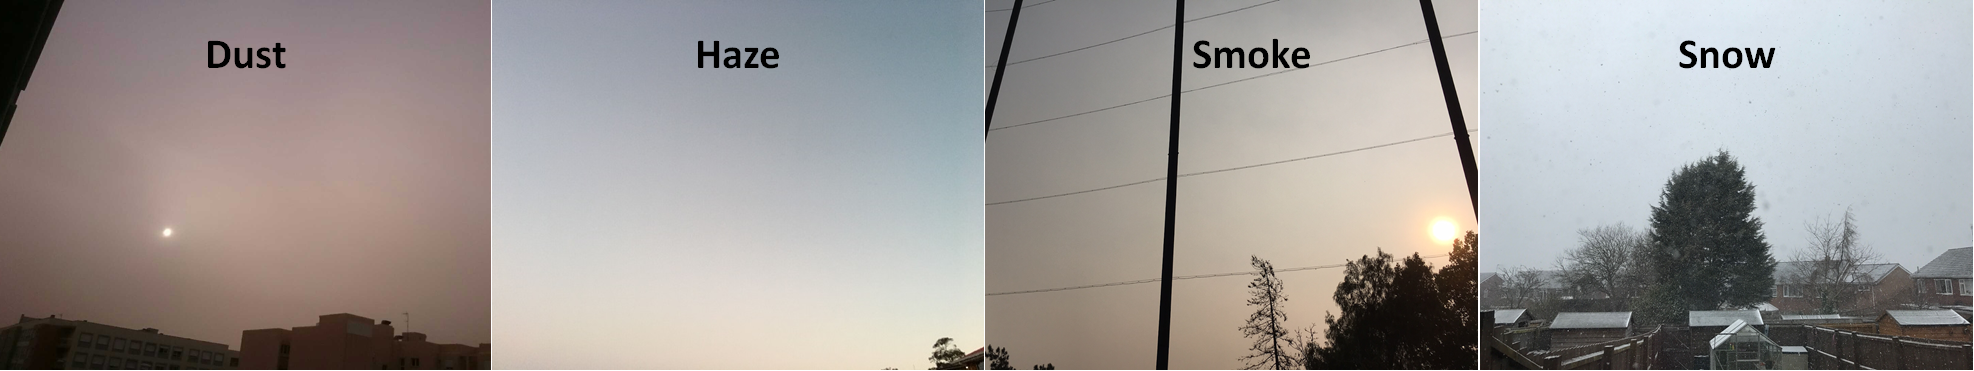 Images of Obscured Cloud COnditions